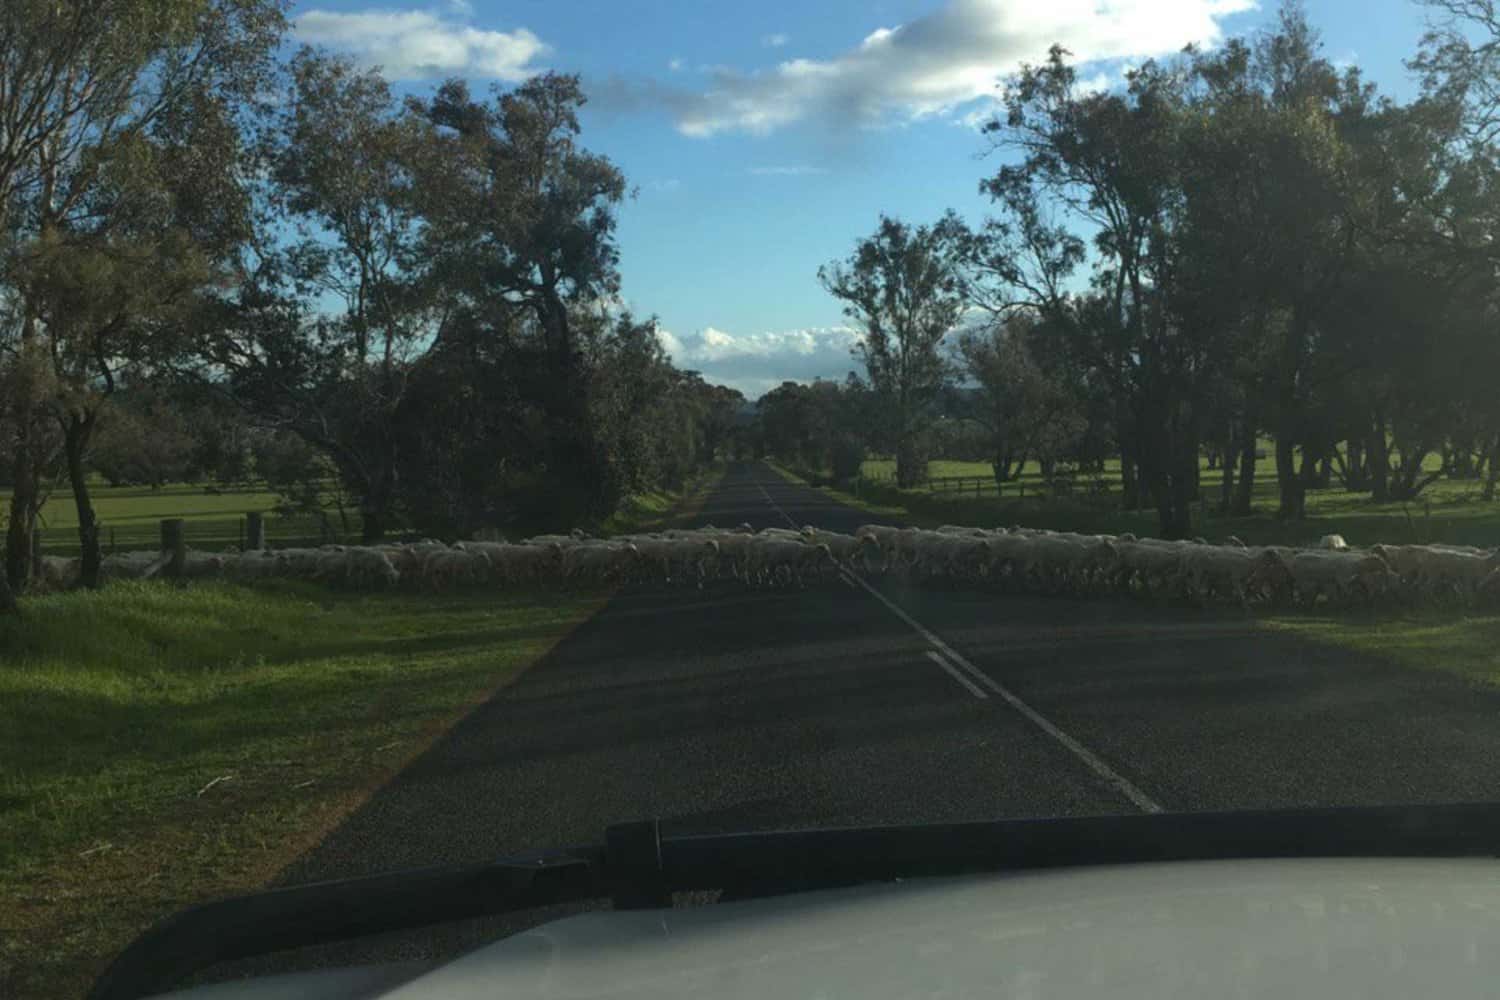 View from a car showing a flock of sheep crossing a country road lined with trees, a common pastoral scene near Margaret River, depicting the region's rural charm.